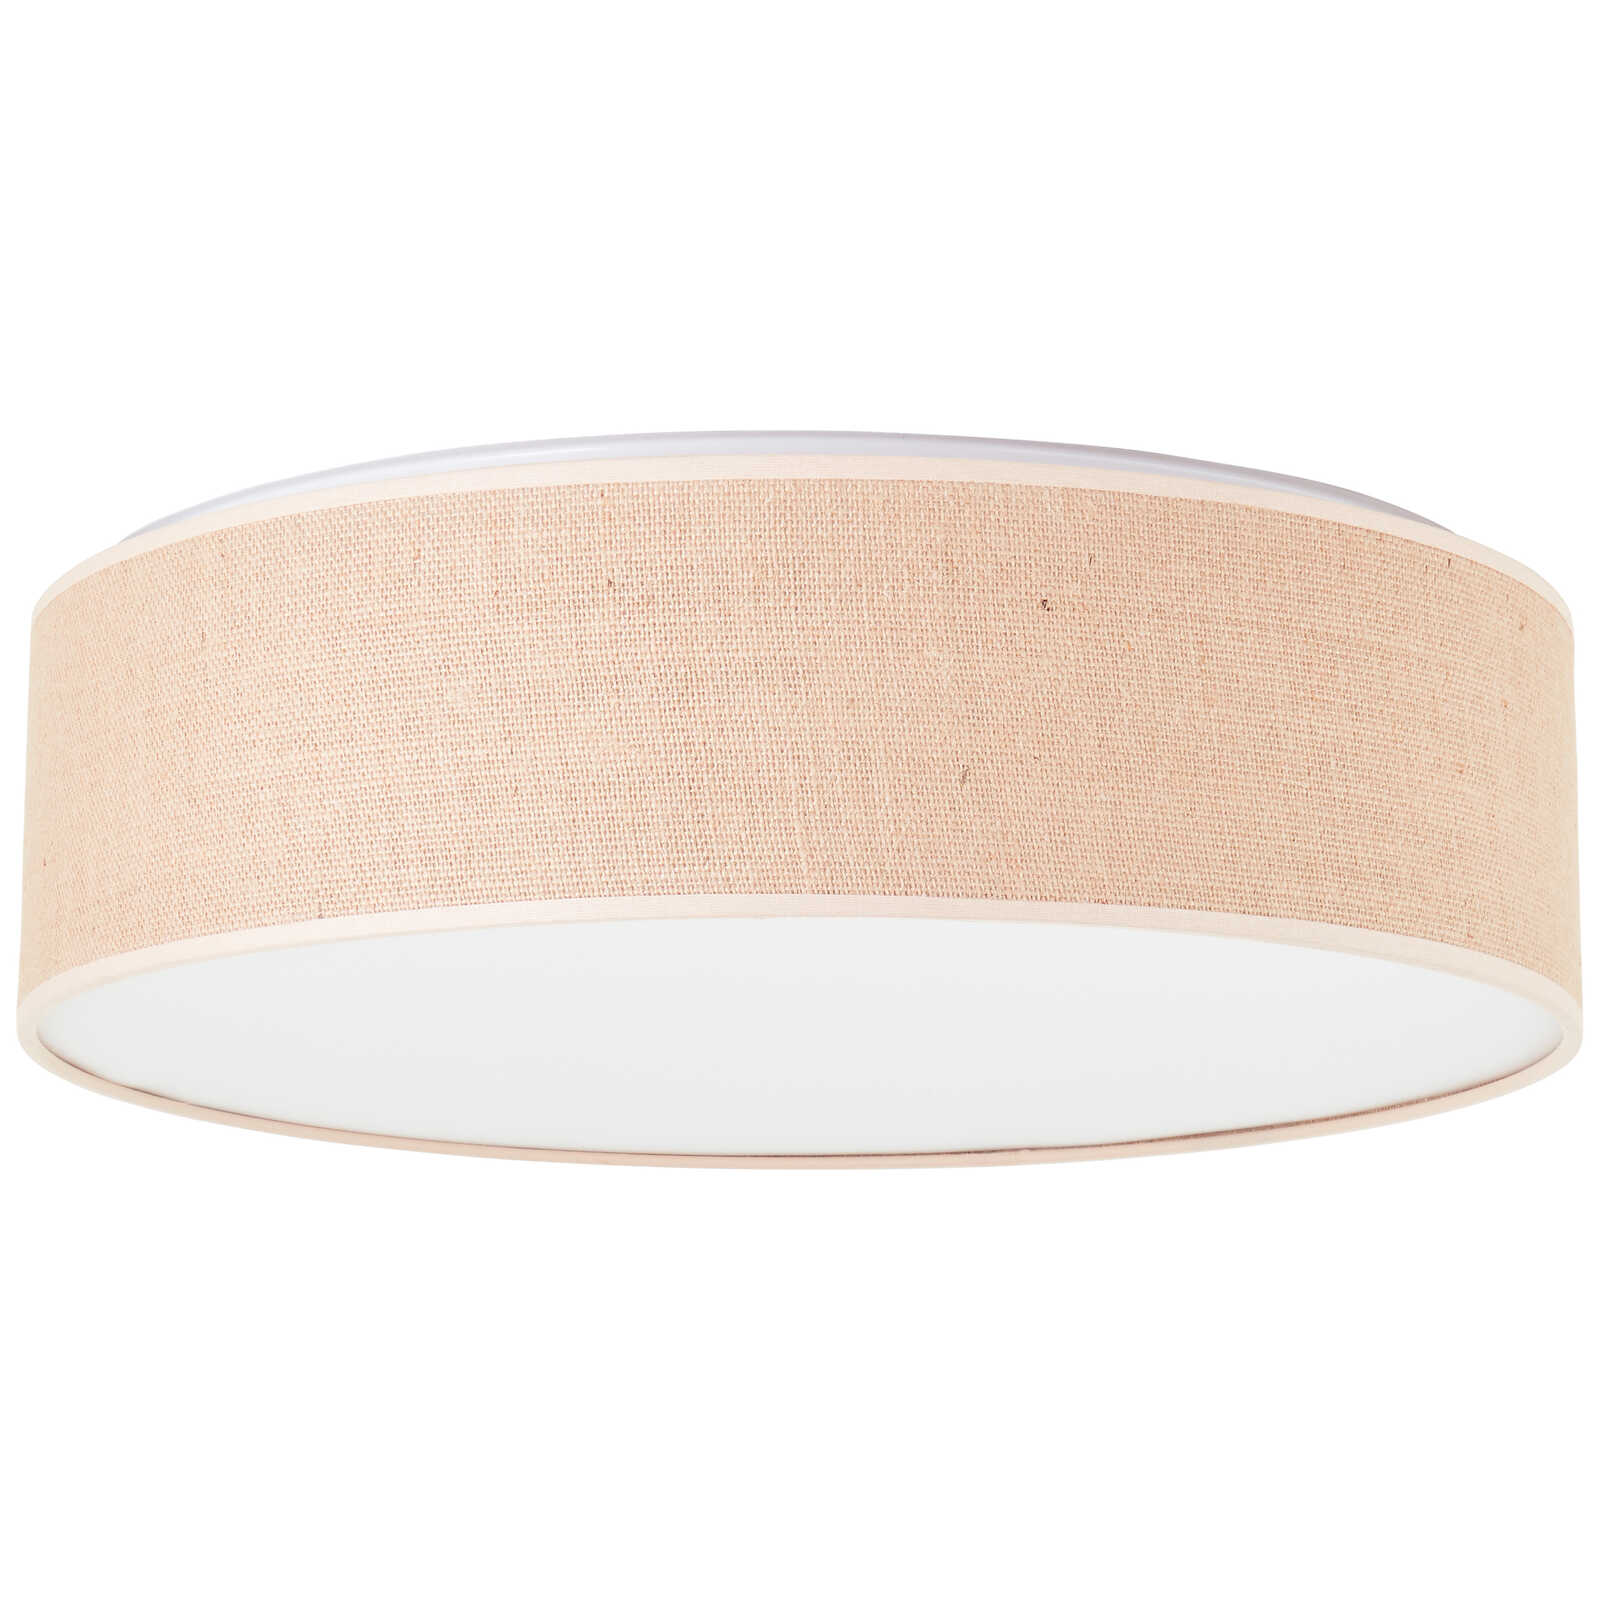             Textile ceiling light - Alicia 5 - Brown
        